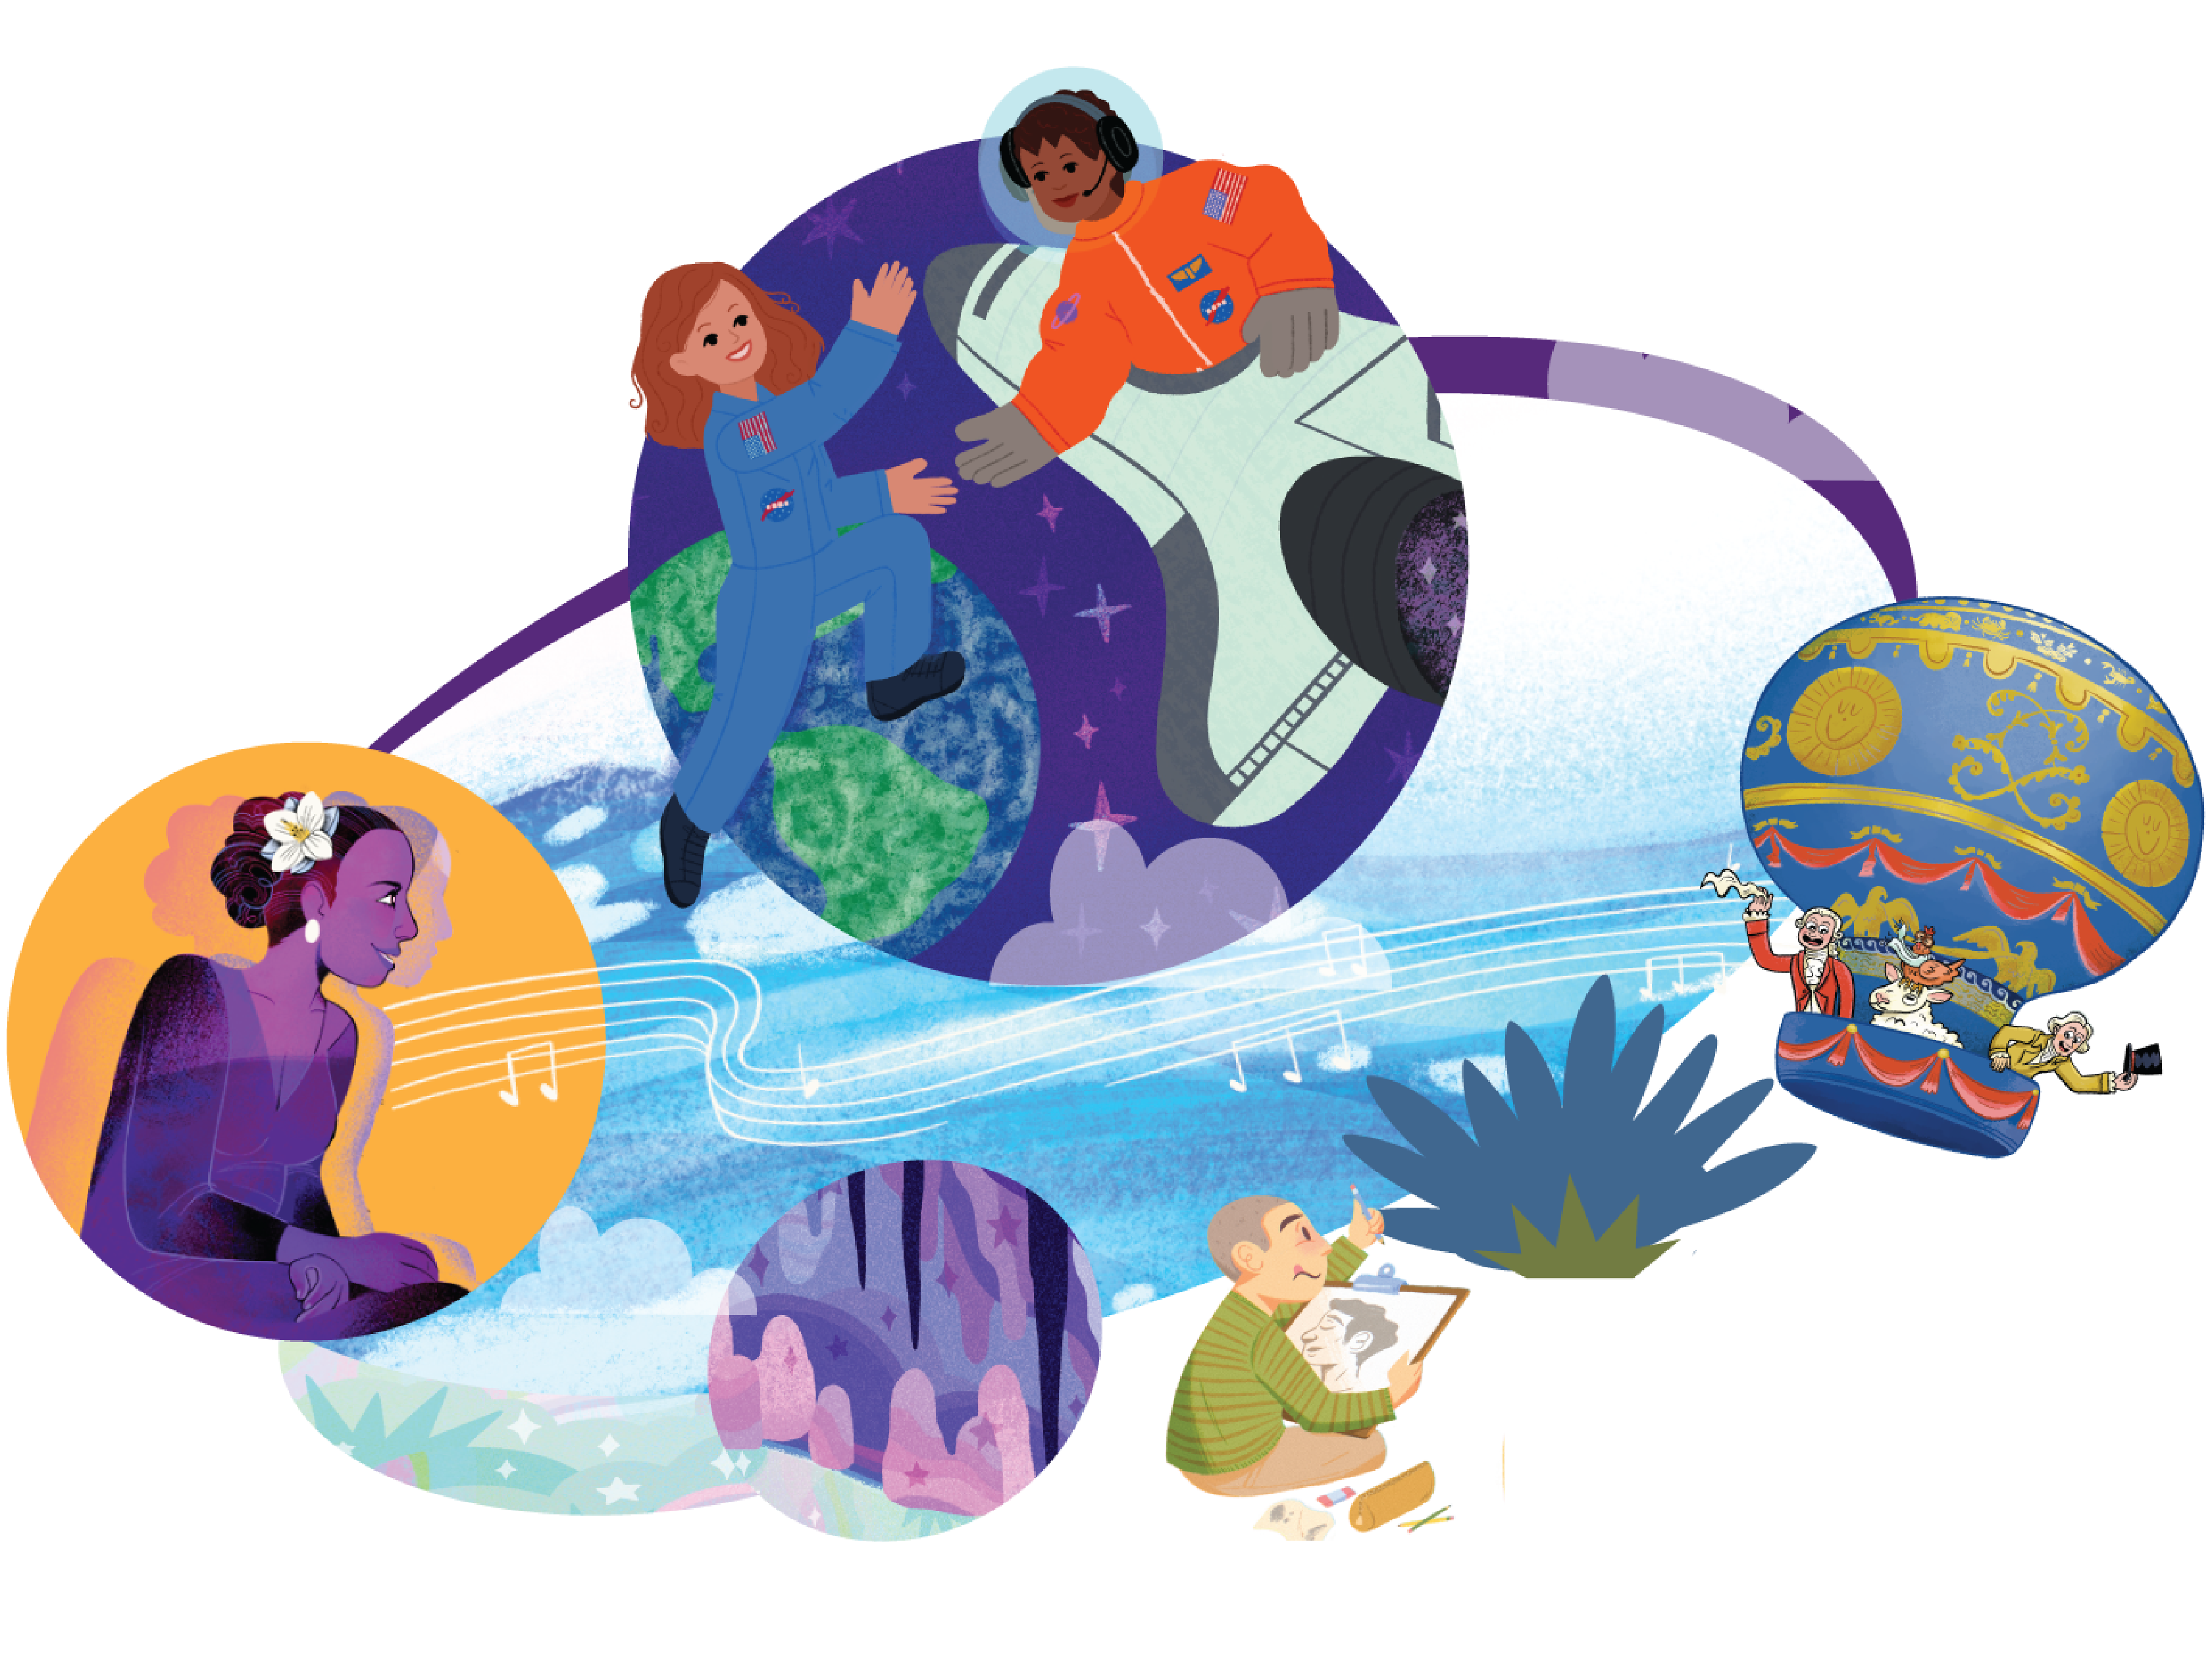 Illustration depicting diverse people engaged in various activities, including astronauts in space, a musician engaged in interdisciplinary research, and a child drawing, set against a whimsical celestial backdrop.